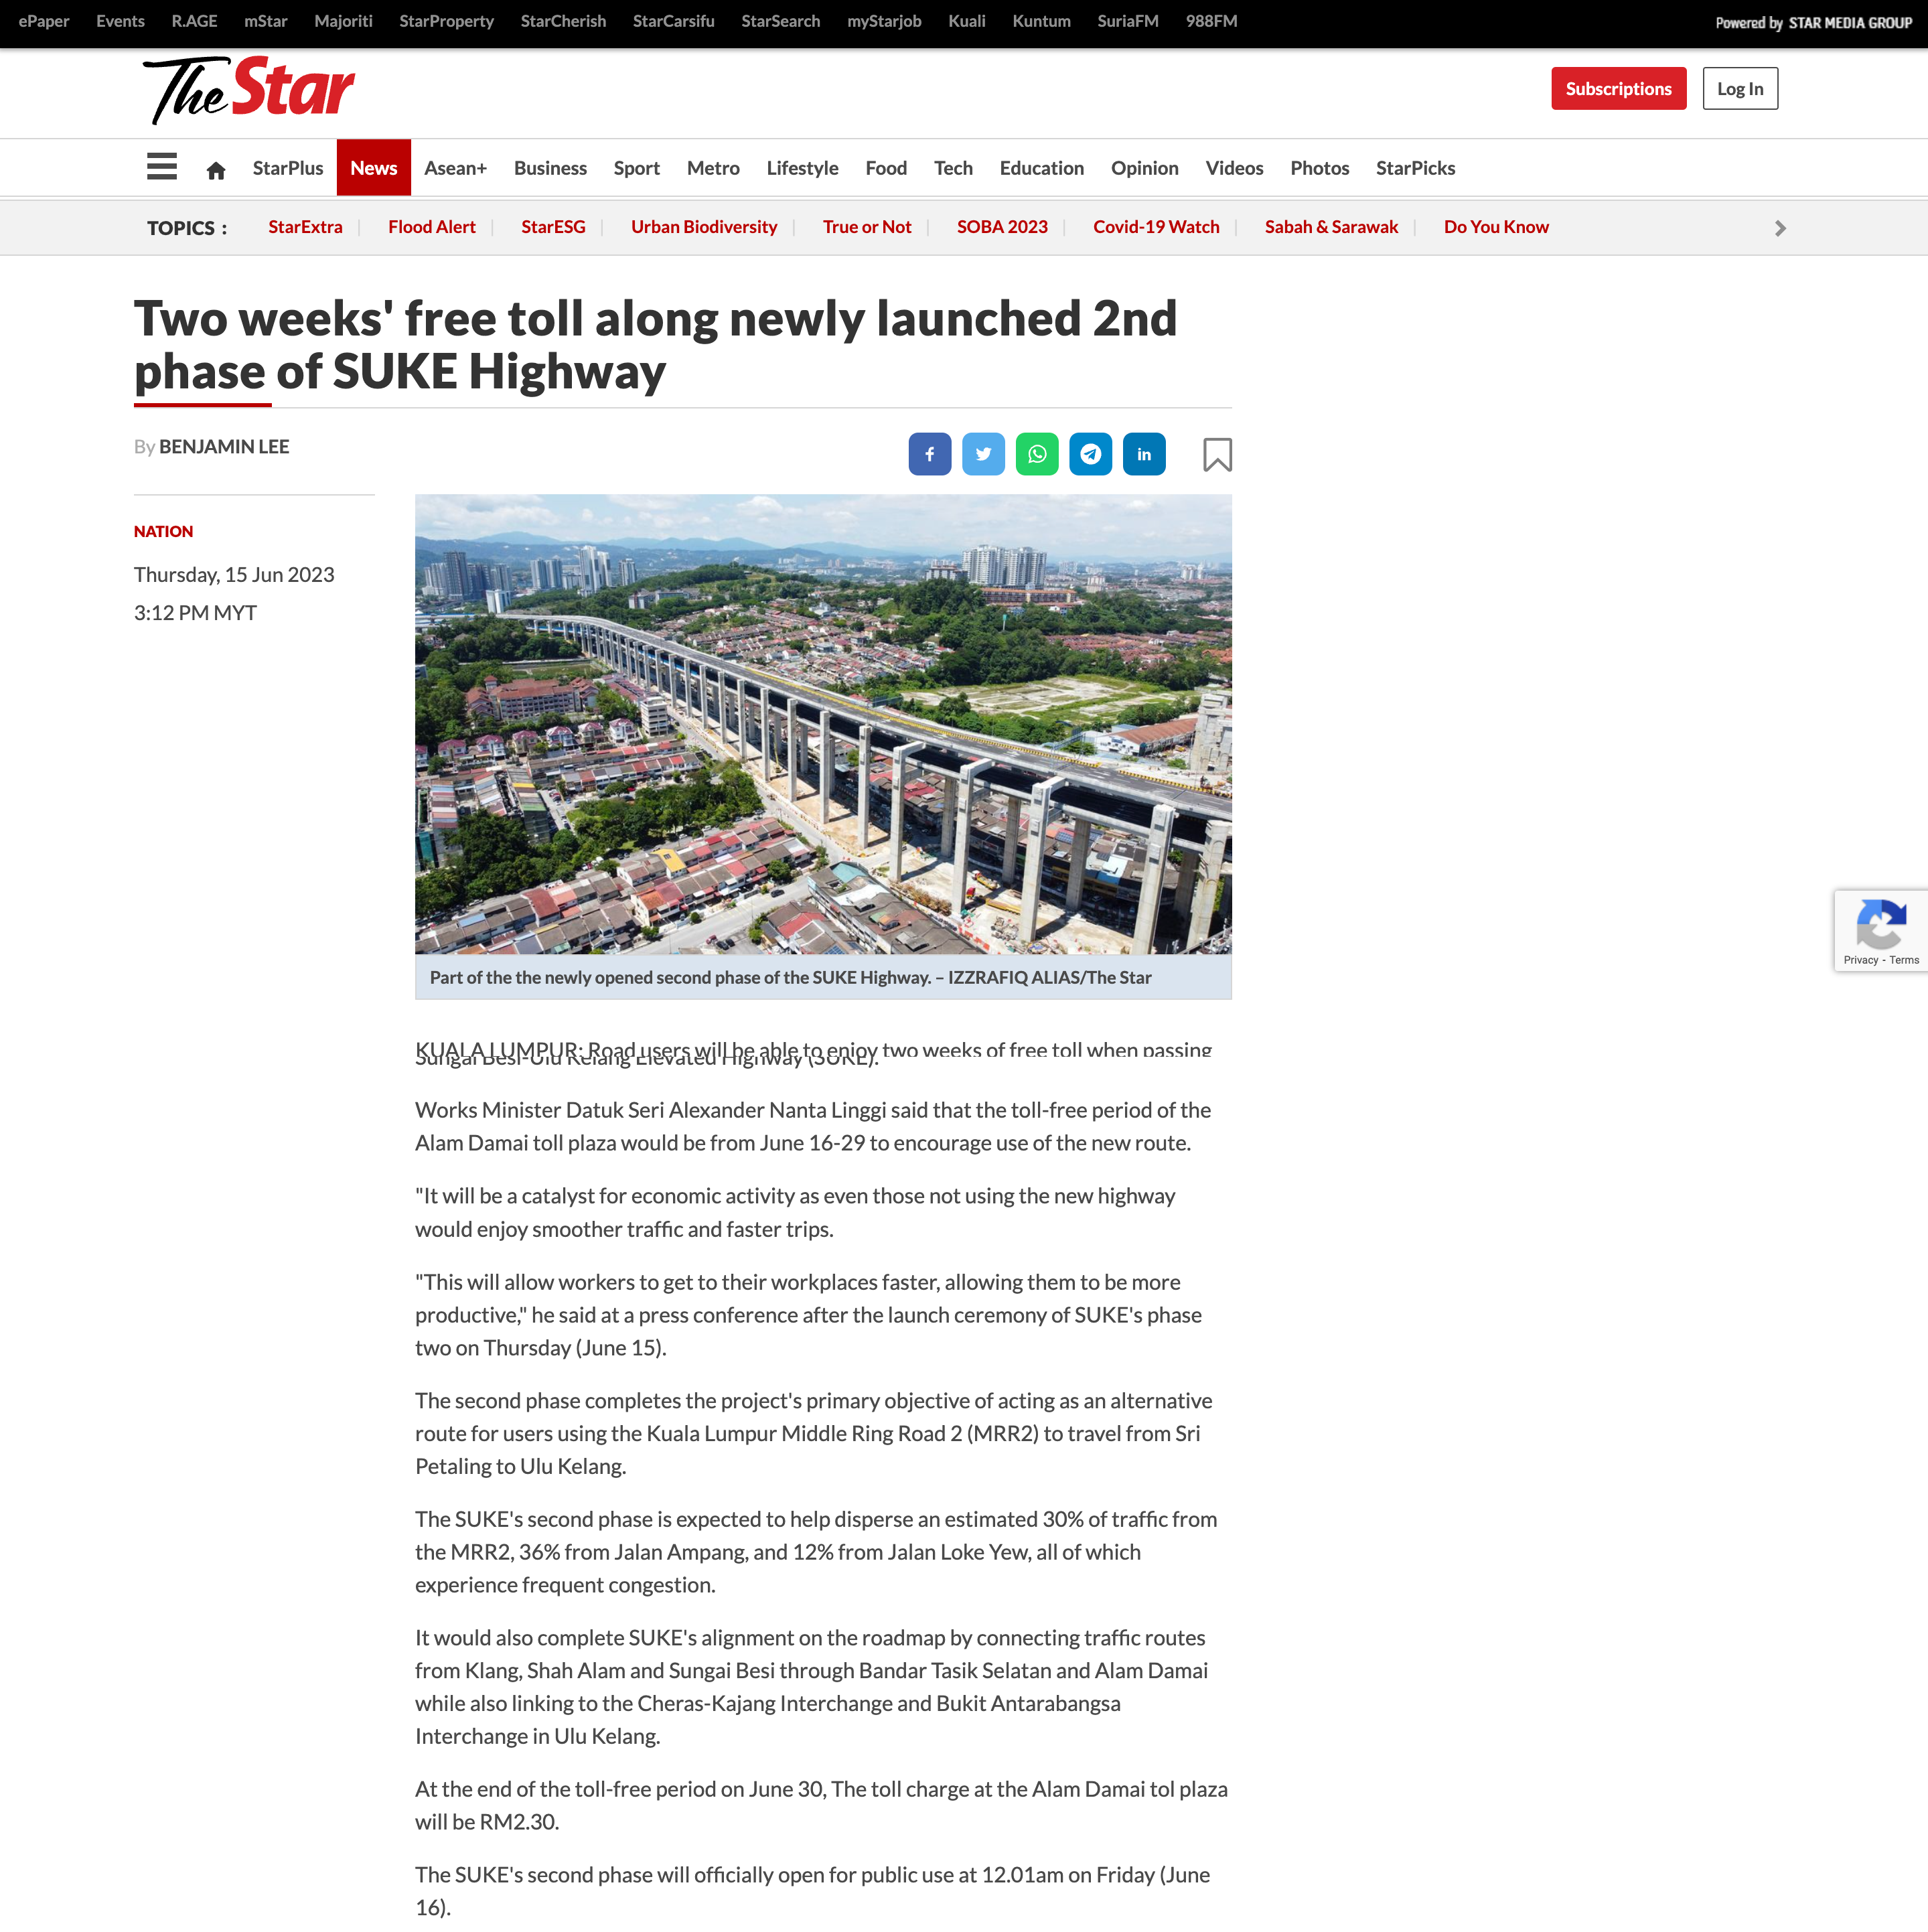 THE STAR | TWO WEEKS’ FREE TOLL ALONG NEWLY LAUNCHED 2ND PHASE OF SUKE HIGHWAY